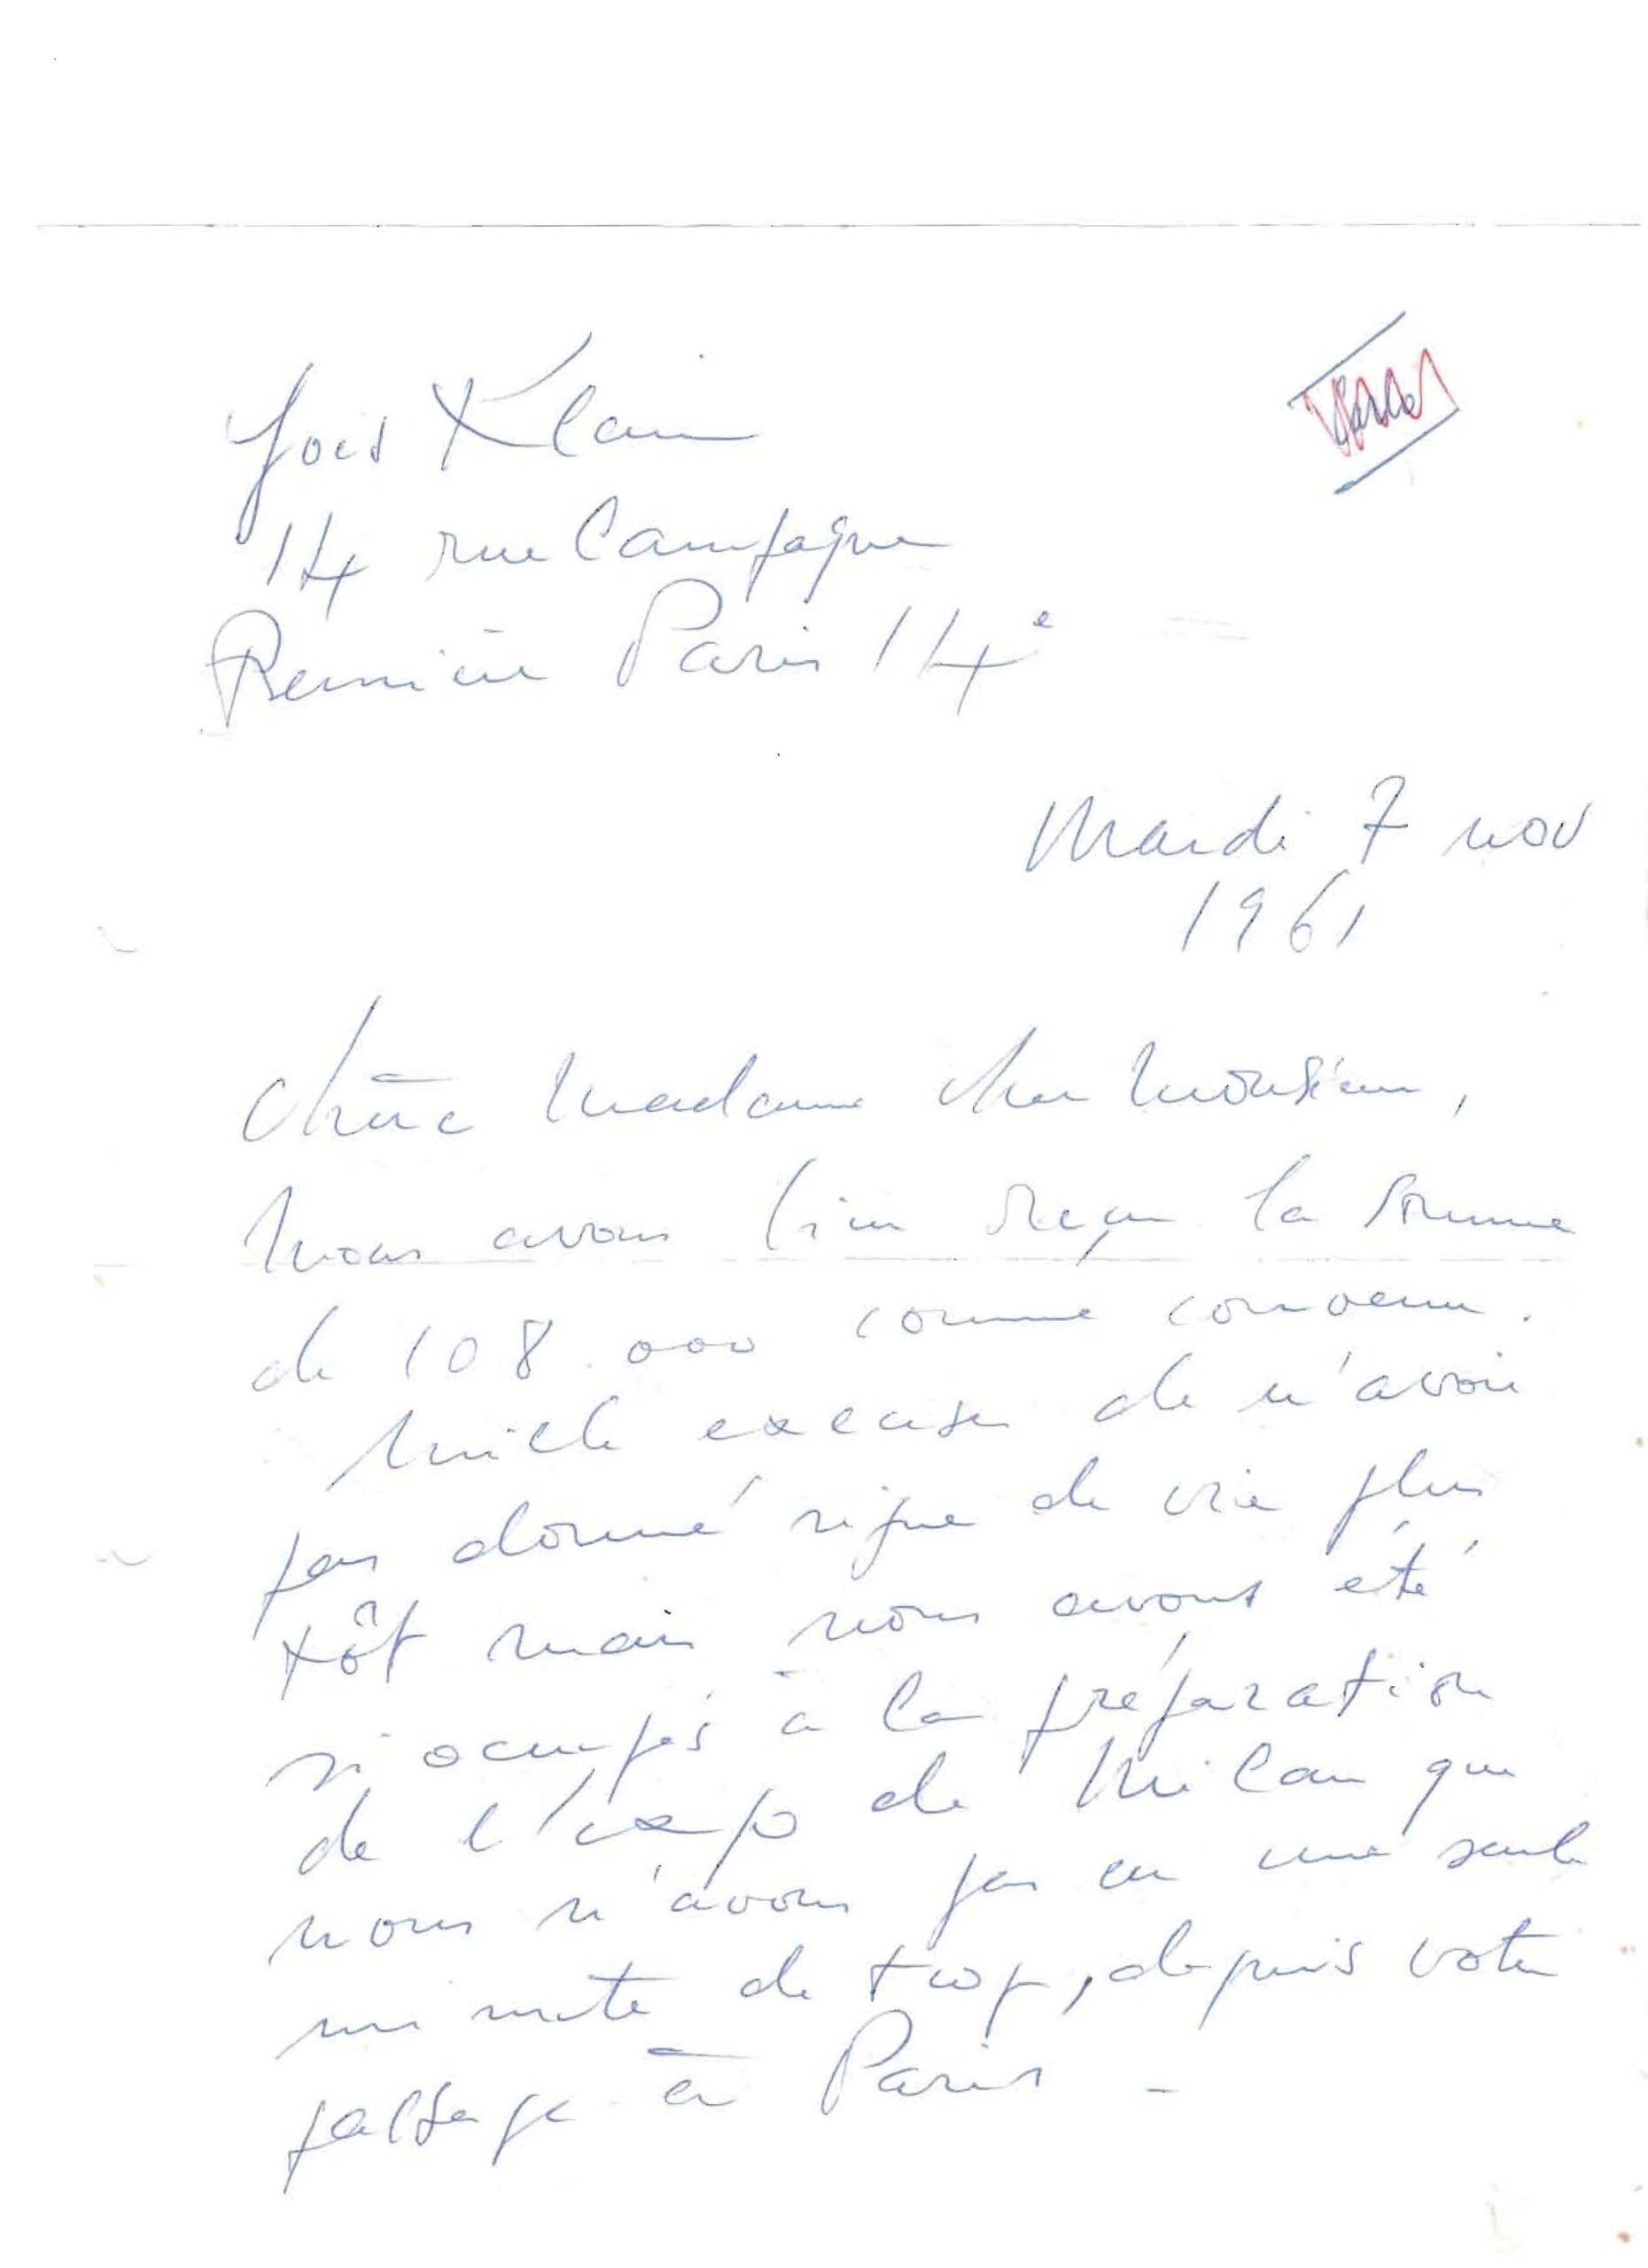 Letter fom Yves Klein to Gallery Ad Libitum